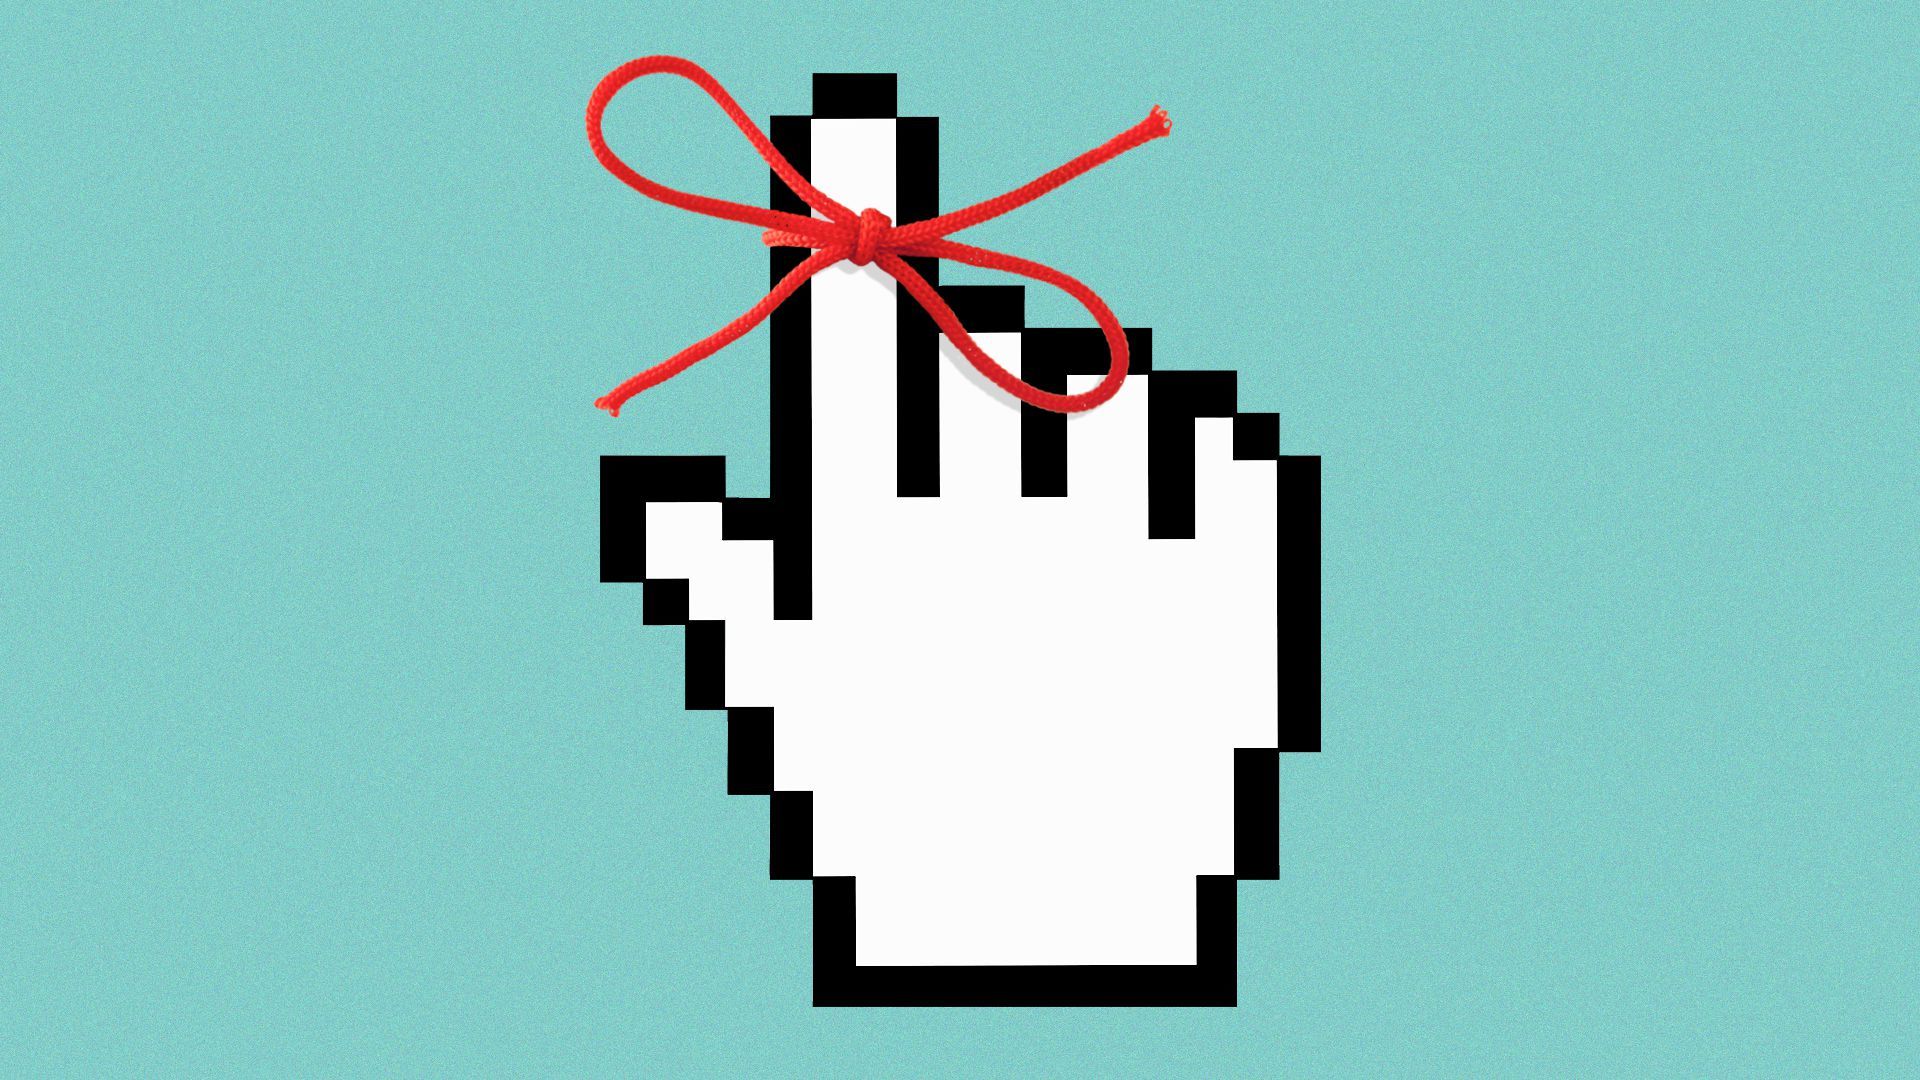 Illustration of a hand cursor with a string tied around the index finger.